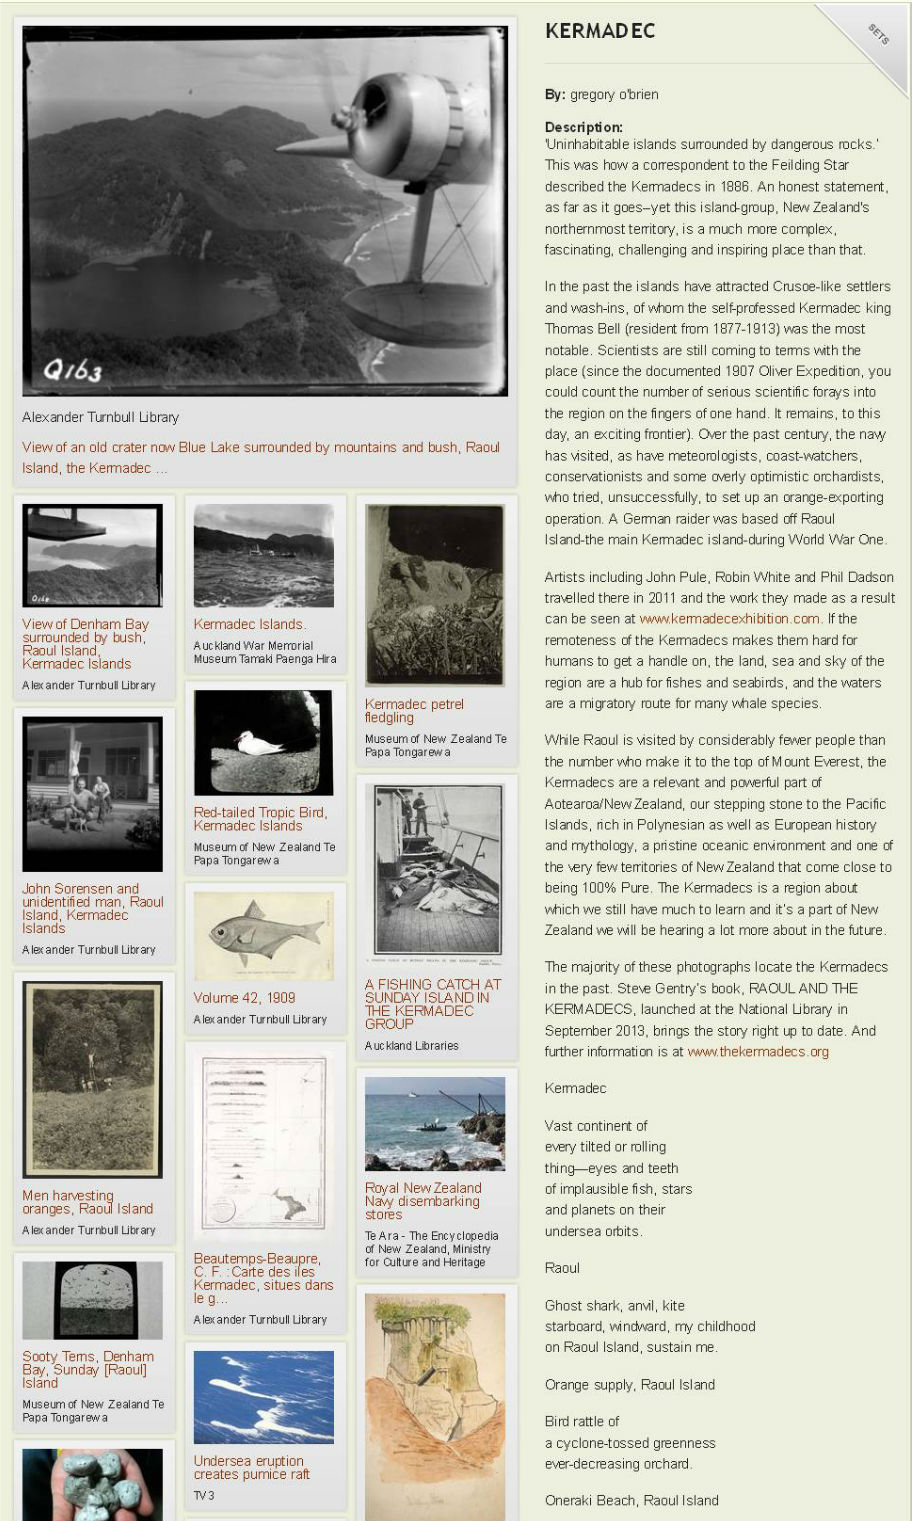 A group of thumbnail images and text about the Kermadec Islands.